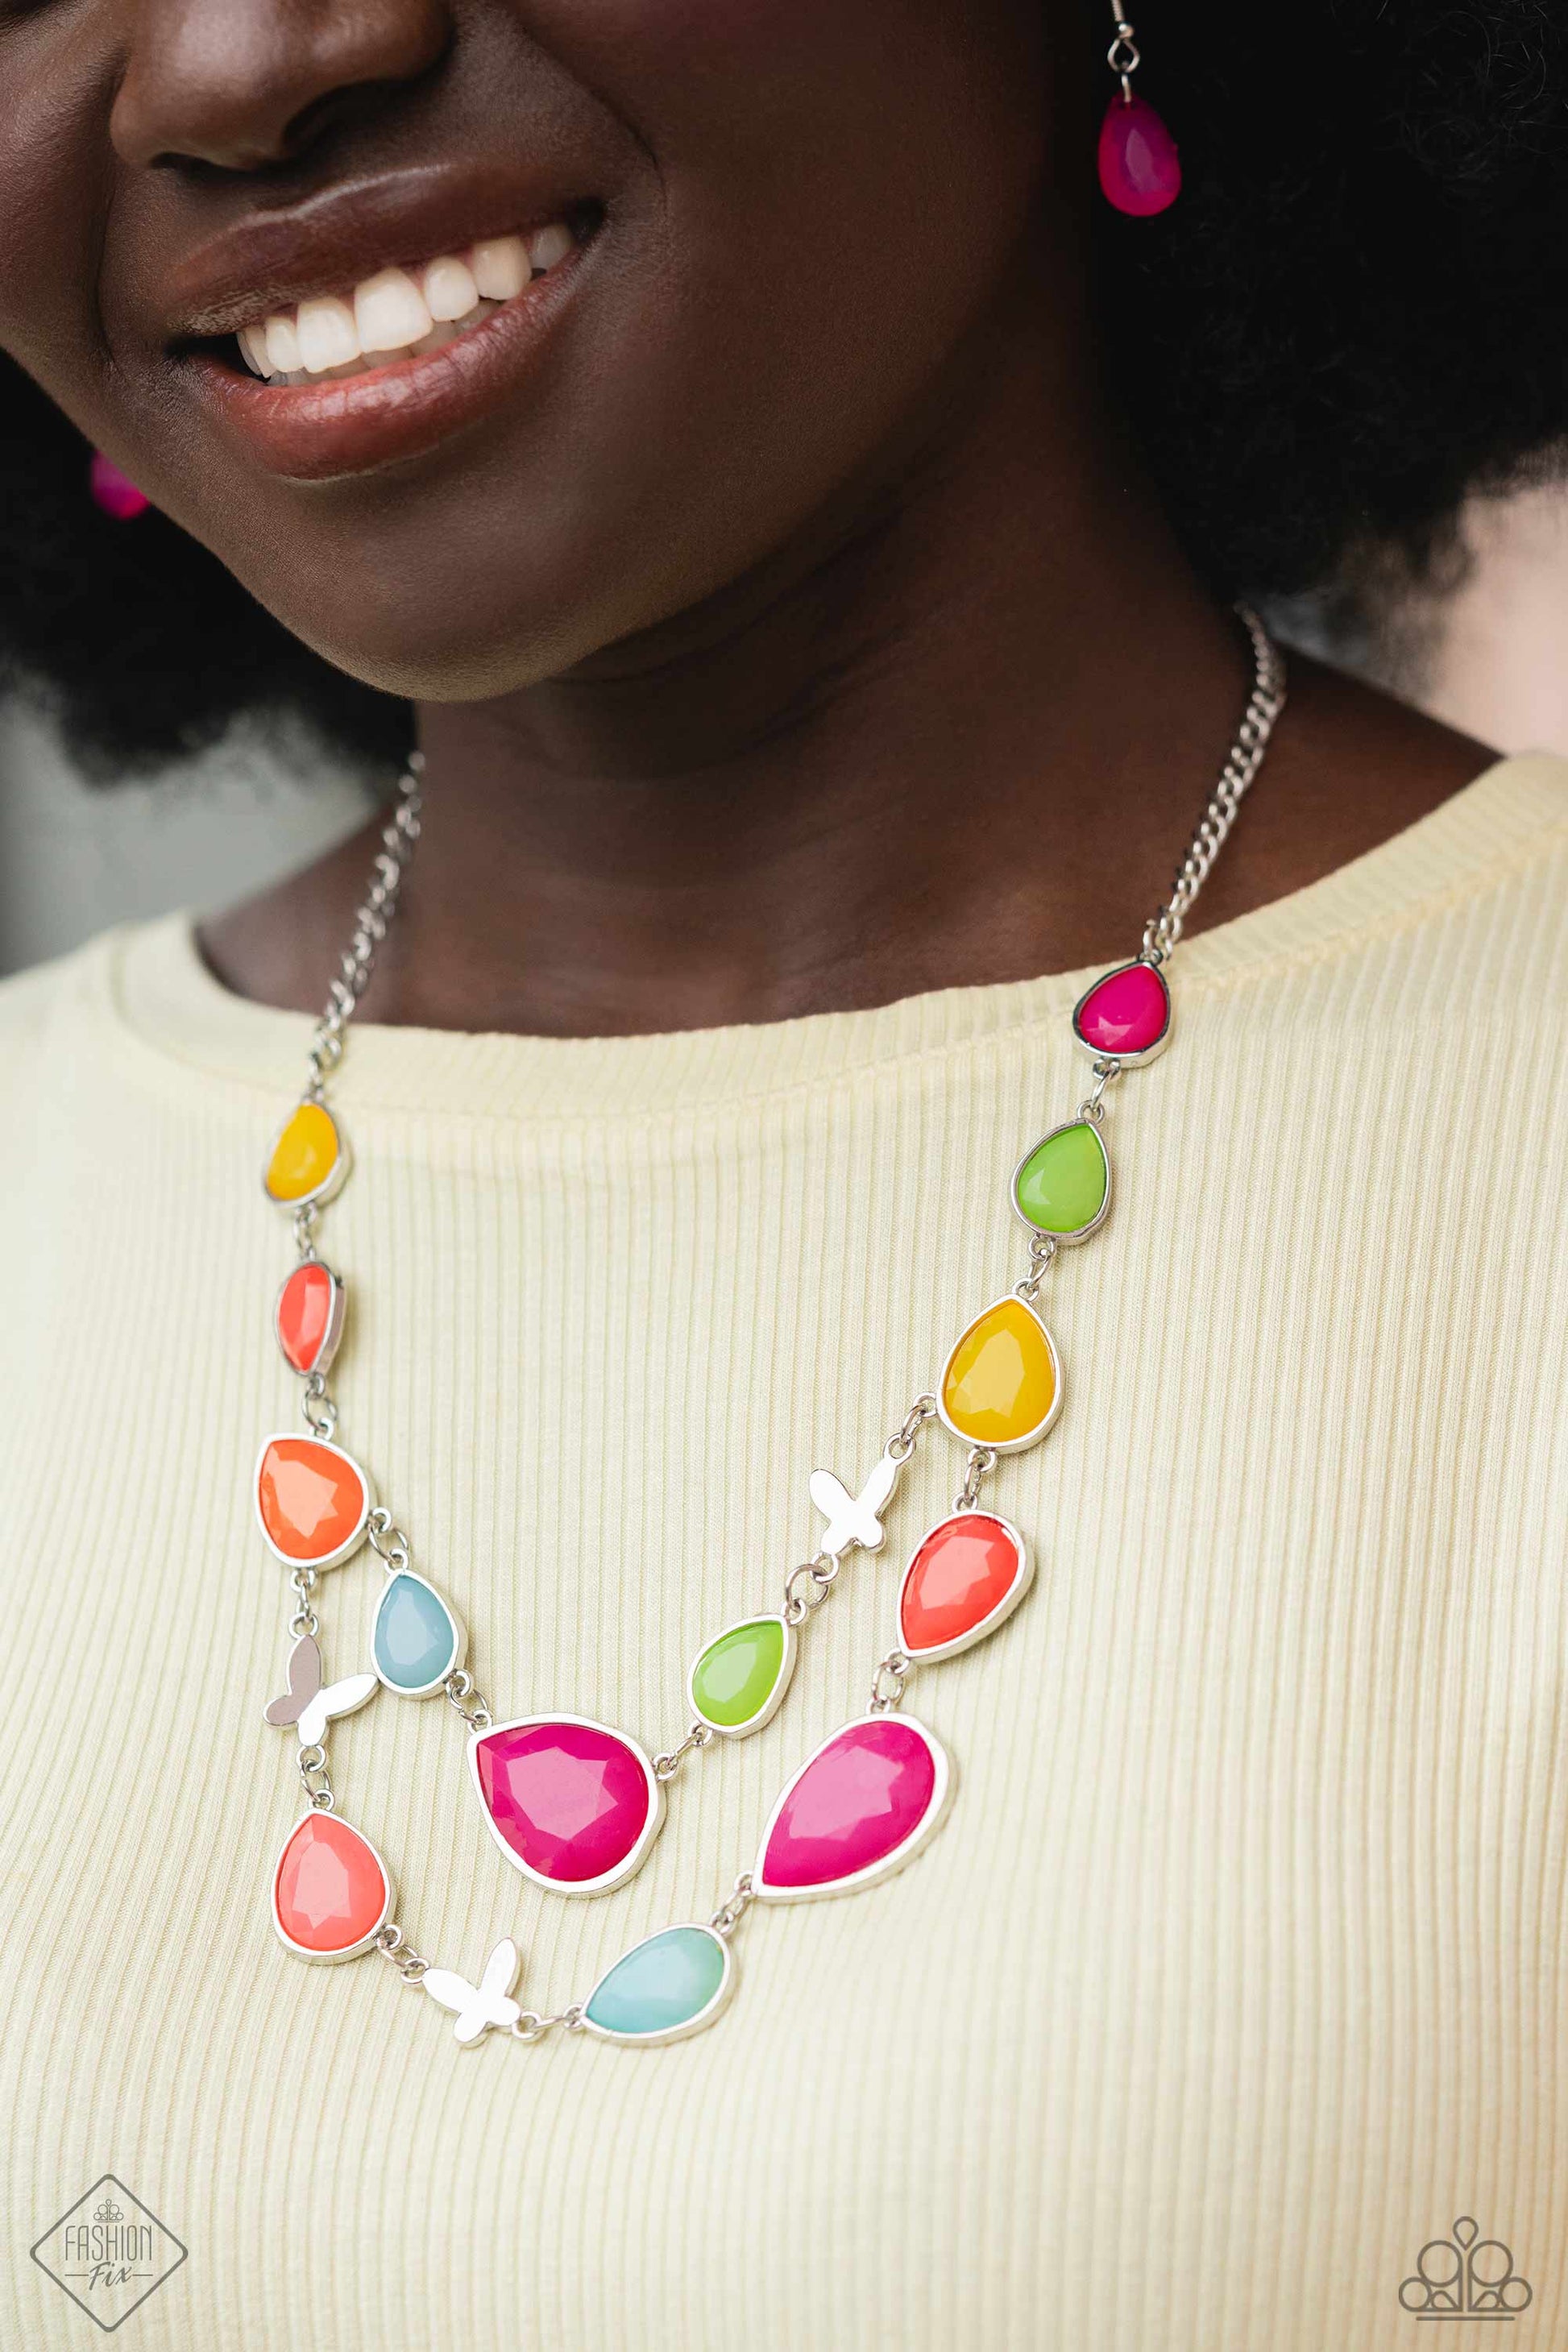 Glimpses of Malibu - Colorful Jewelry Set - Paparazzi Accessories - Includes one of each accessory featured in the Glimpses of Malibu Trend Blend in January's Fashion Fix: BRIGHT Club - Multi Necklace, BRIGHT This 'Sway' - Multi Post Earrings, In All the BRIGHT Places - Multi Bracelet, In Plain BRIGHT - Pink Ring.